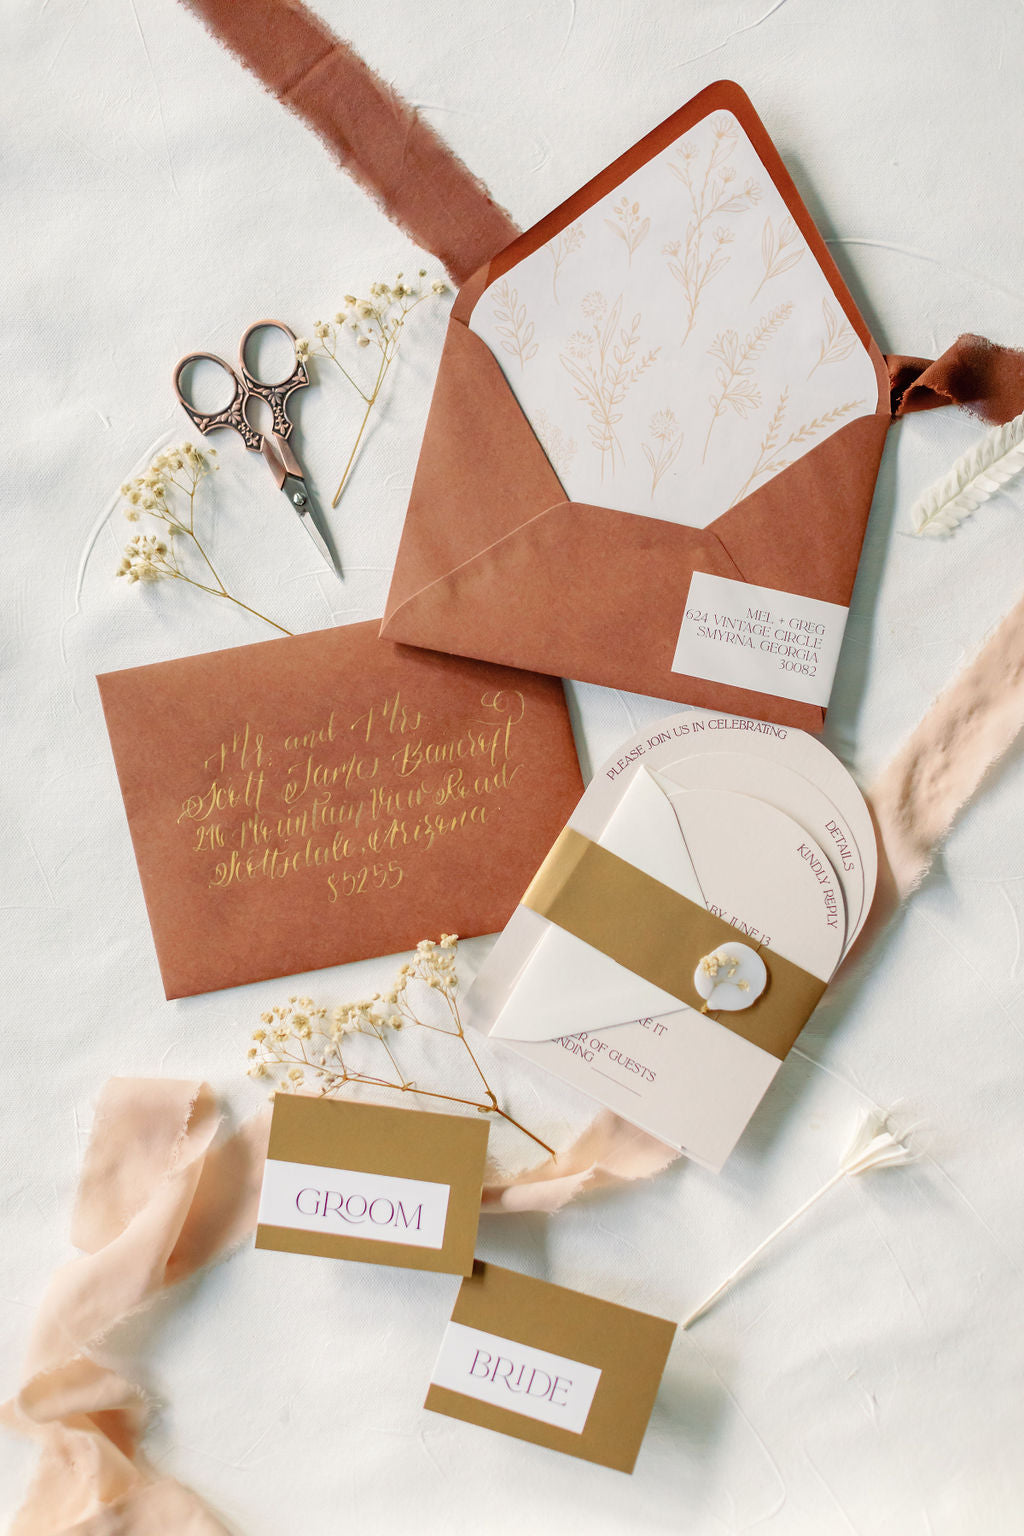 terracotta wedding invitations with envelope liner, arched cards and dried floral wax seals 